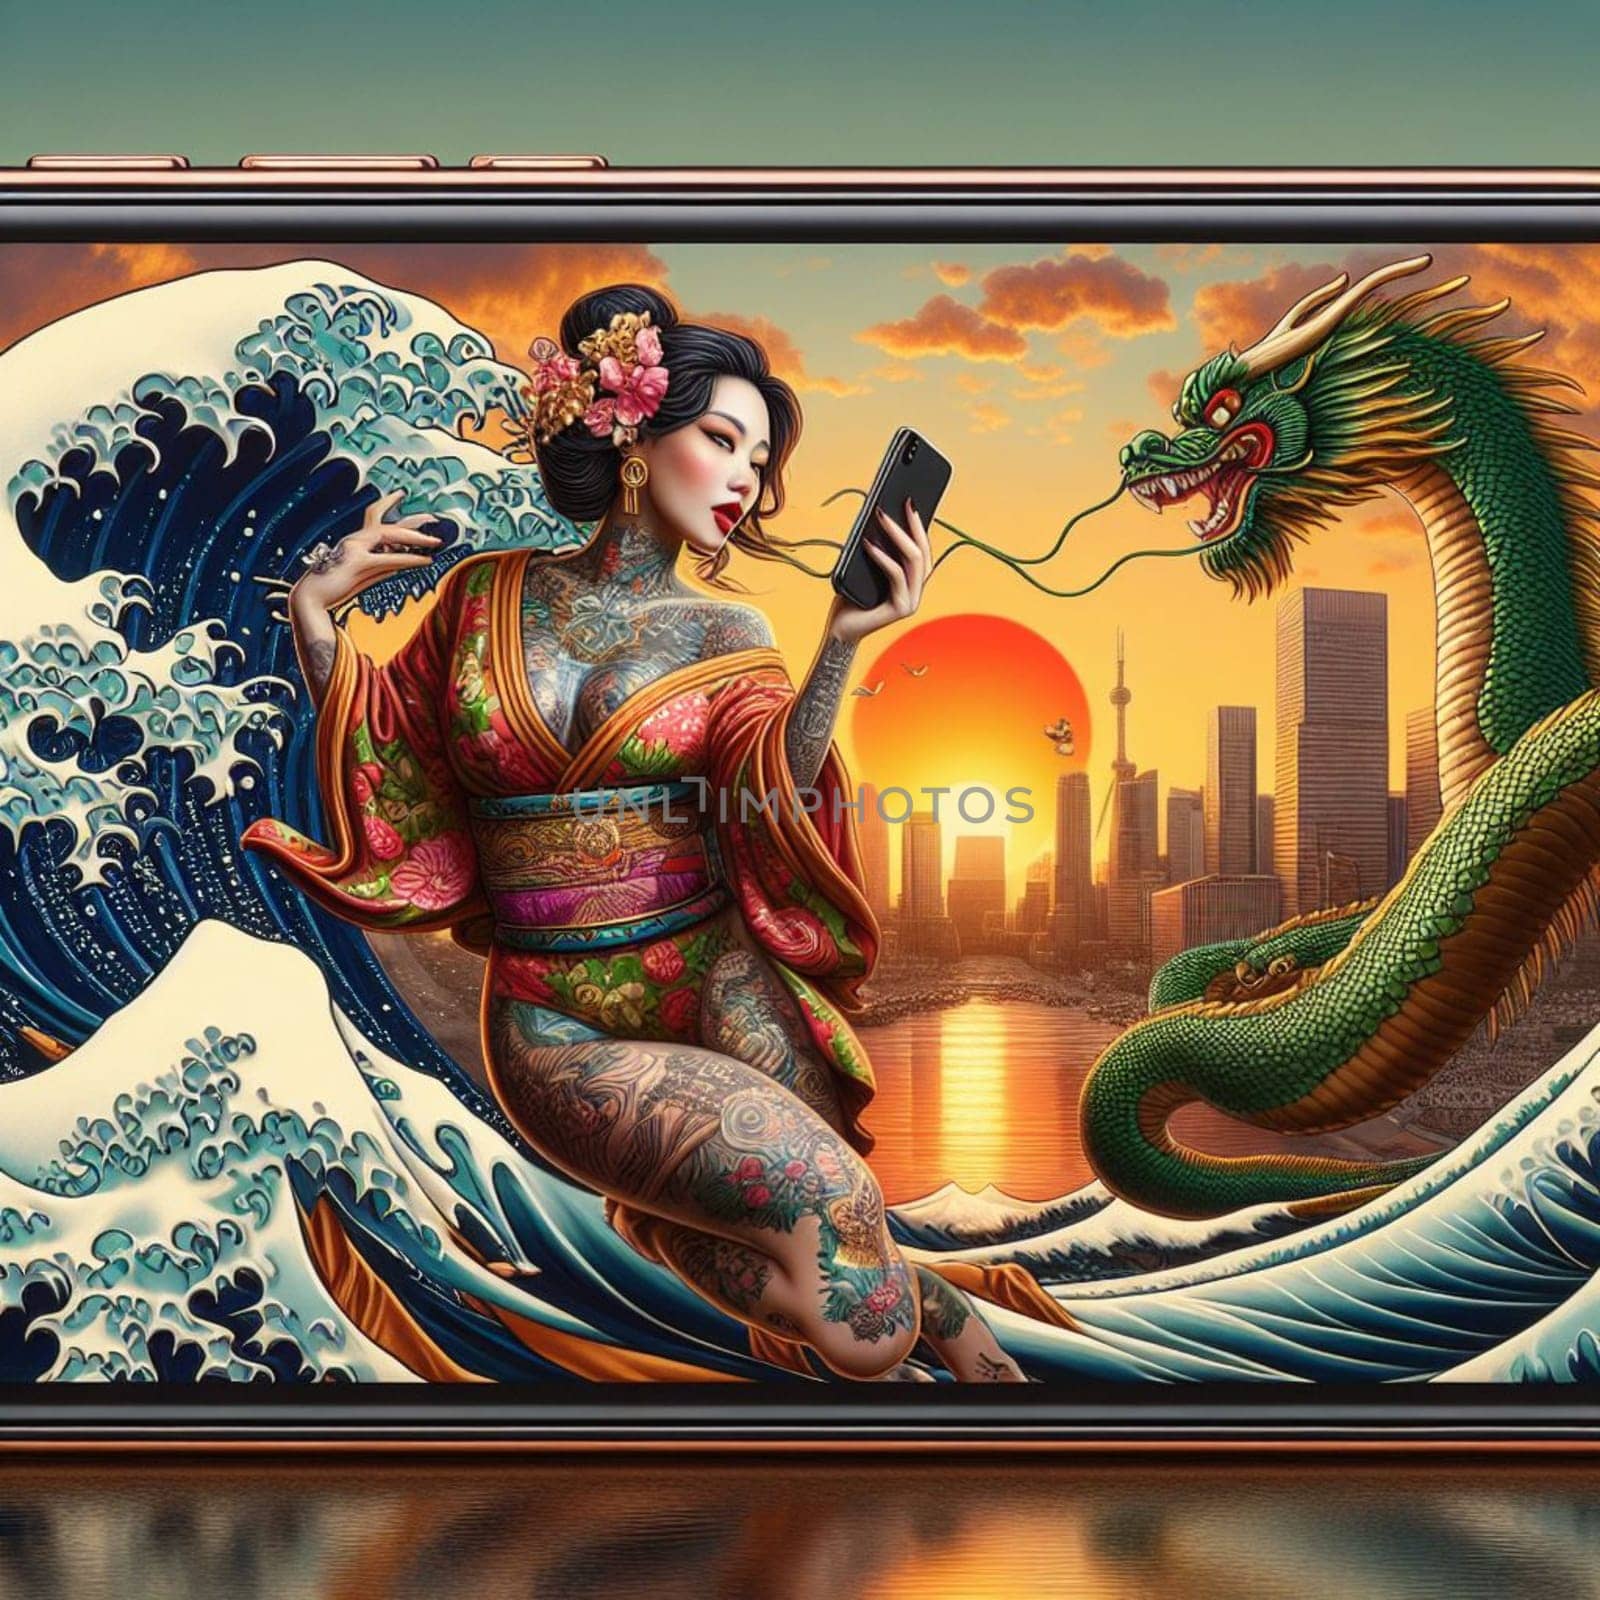 traditional asian woman wear kimono silky dress dance with dragon in chinese new year, background shanghai city skyline come out of phone screen on a desk